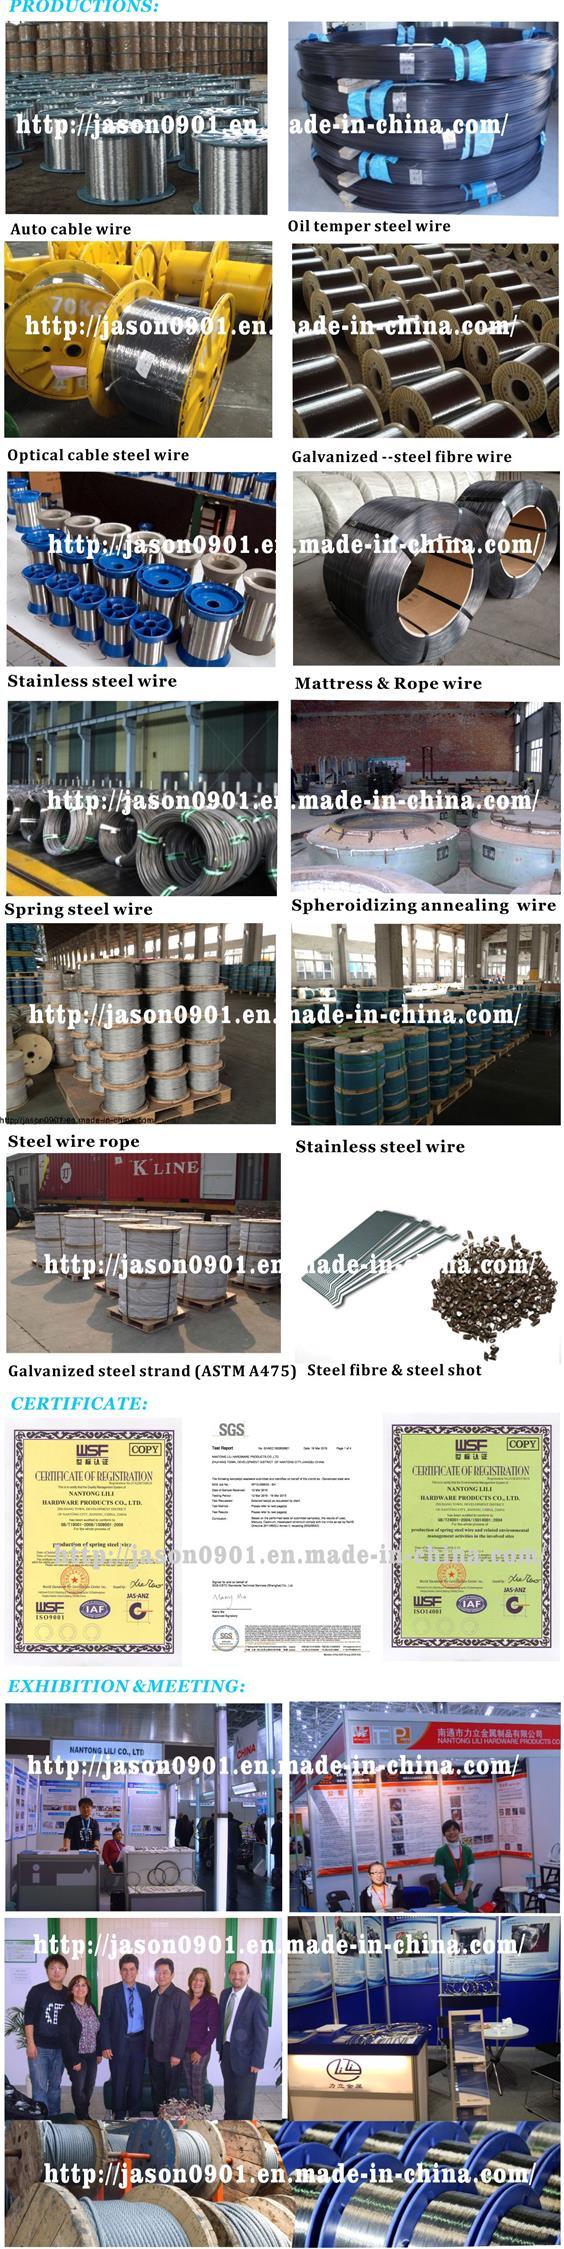 Stainless Wire Rope, Wire Rope, Steel Rope, Stainless Steel Wire Rope